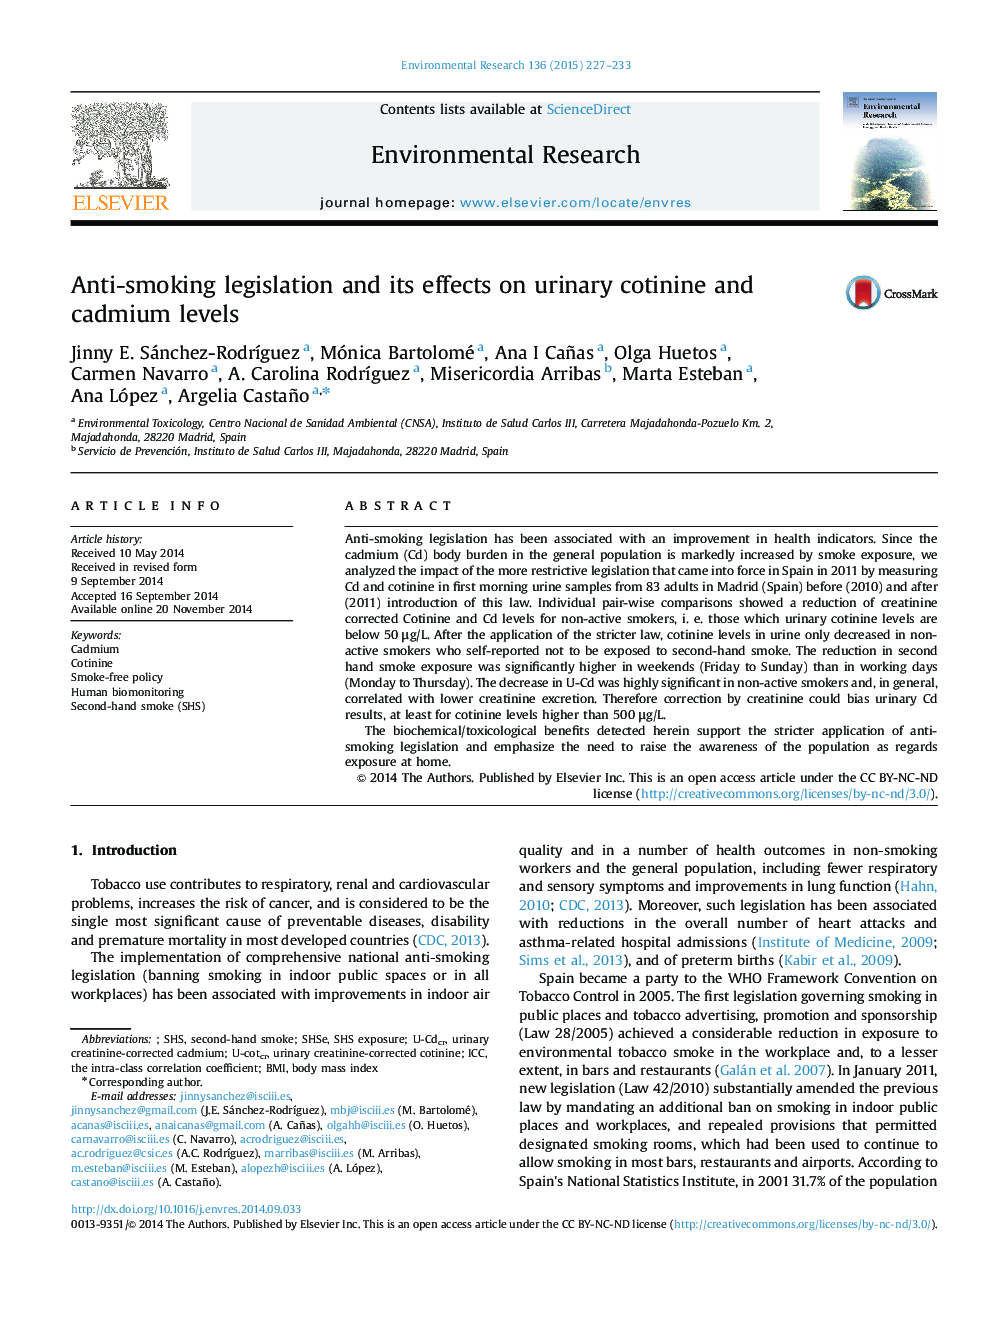 Anti-smoking legislation and its effects on urinary cotinine and cadmium levels